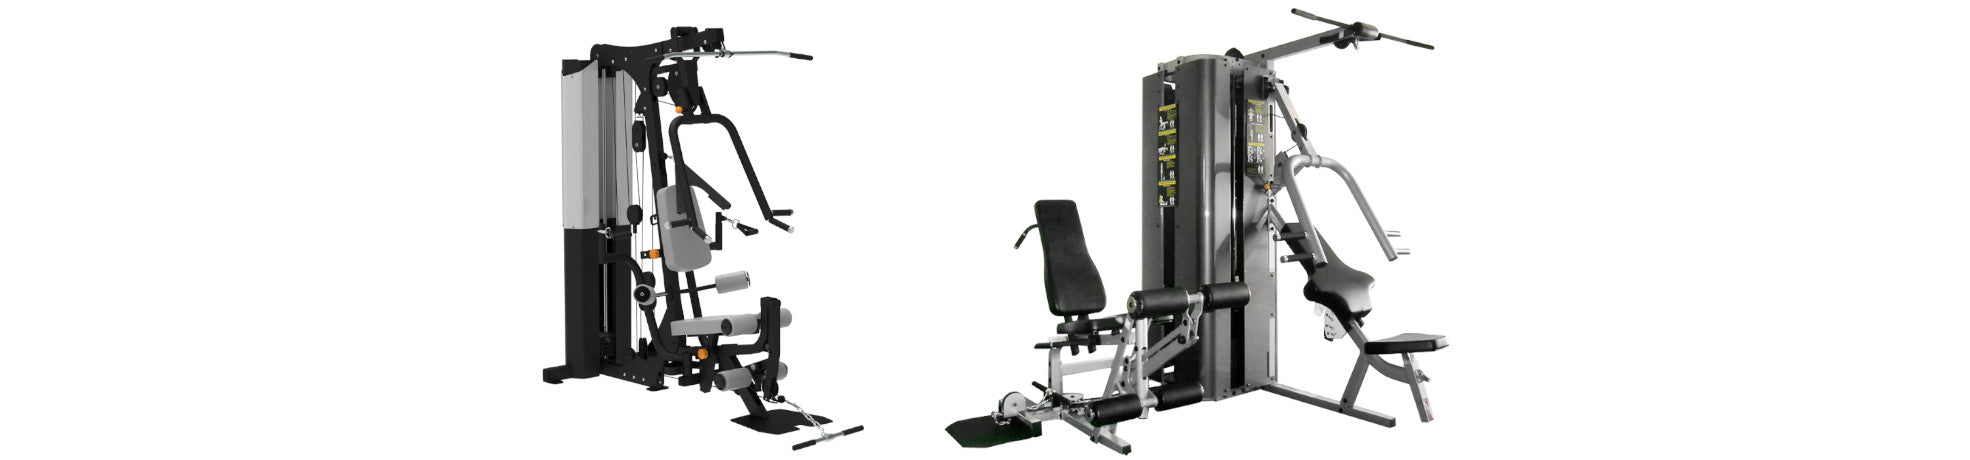 Commercial Home Gyms Collection Image.